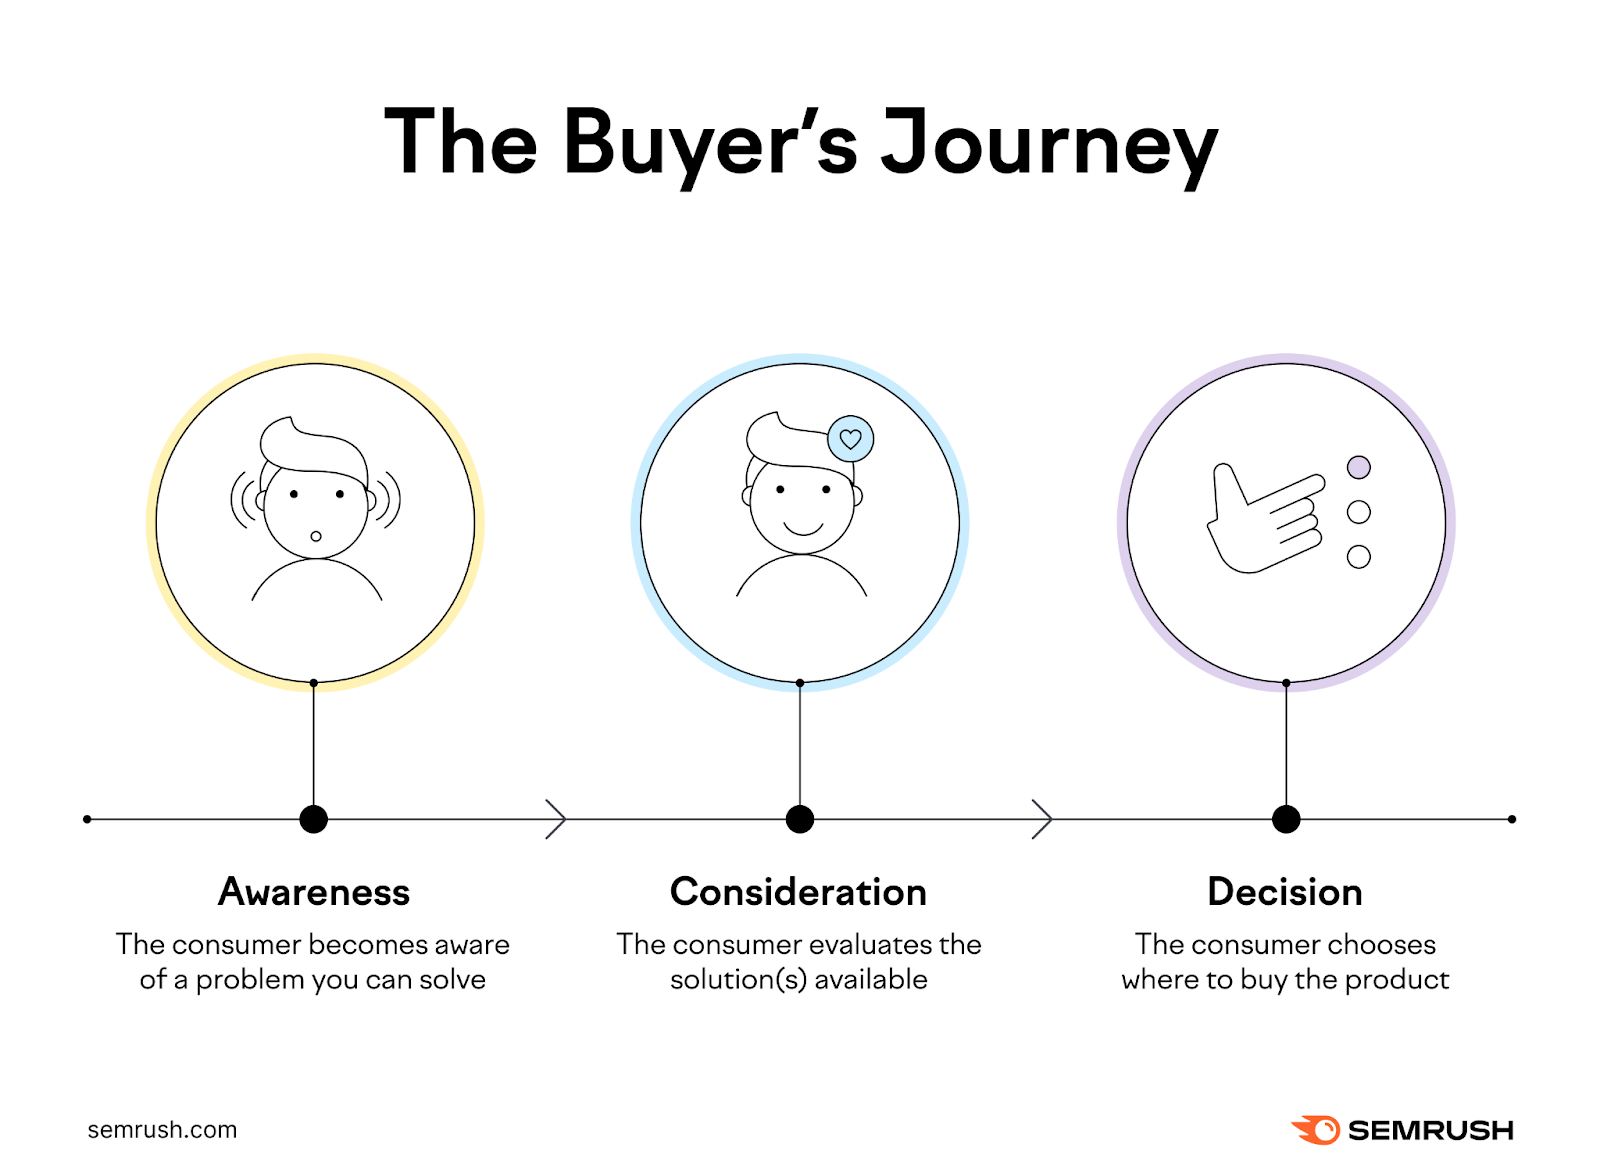 The 3  stages of the buyer’s travel  are awareness, past    consideration, past    decision